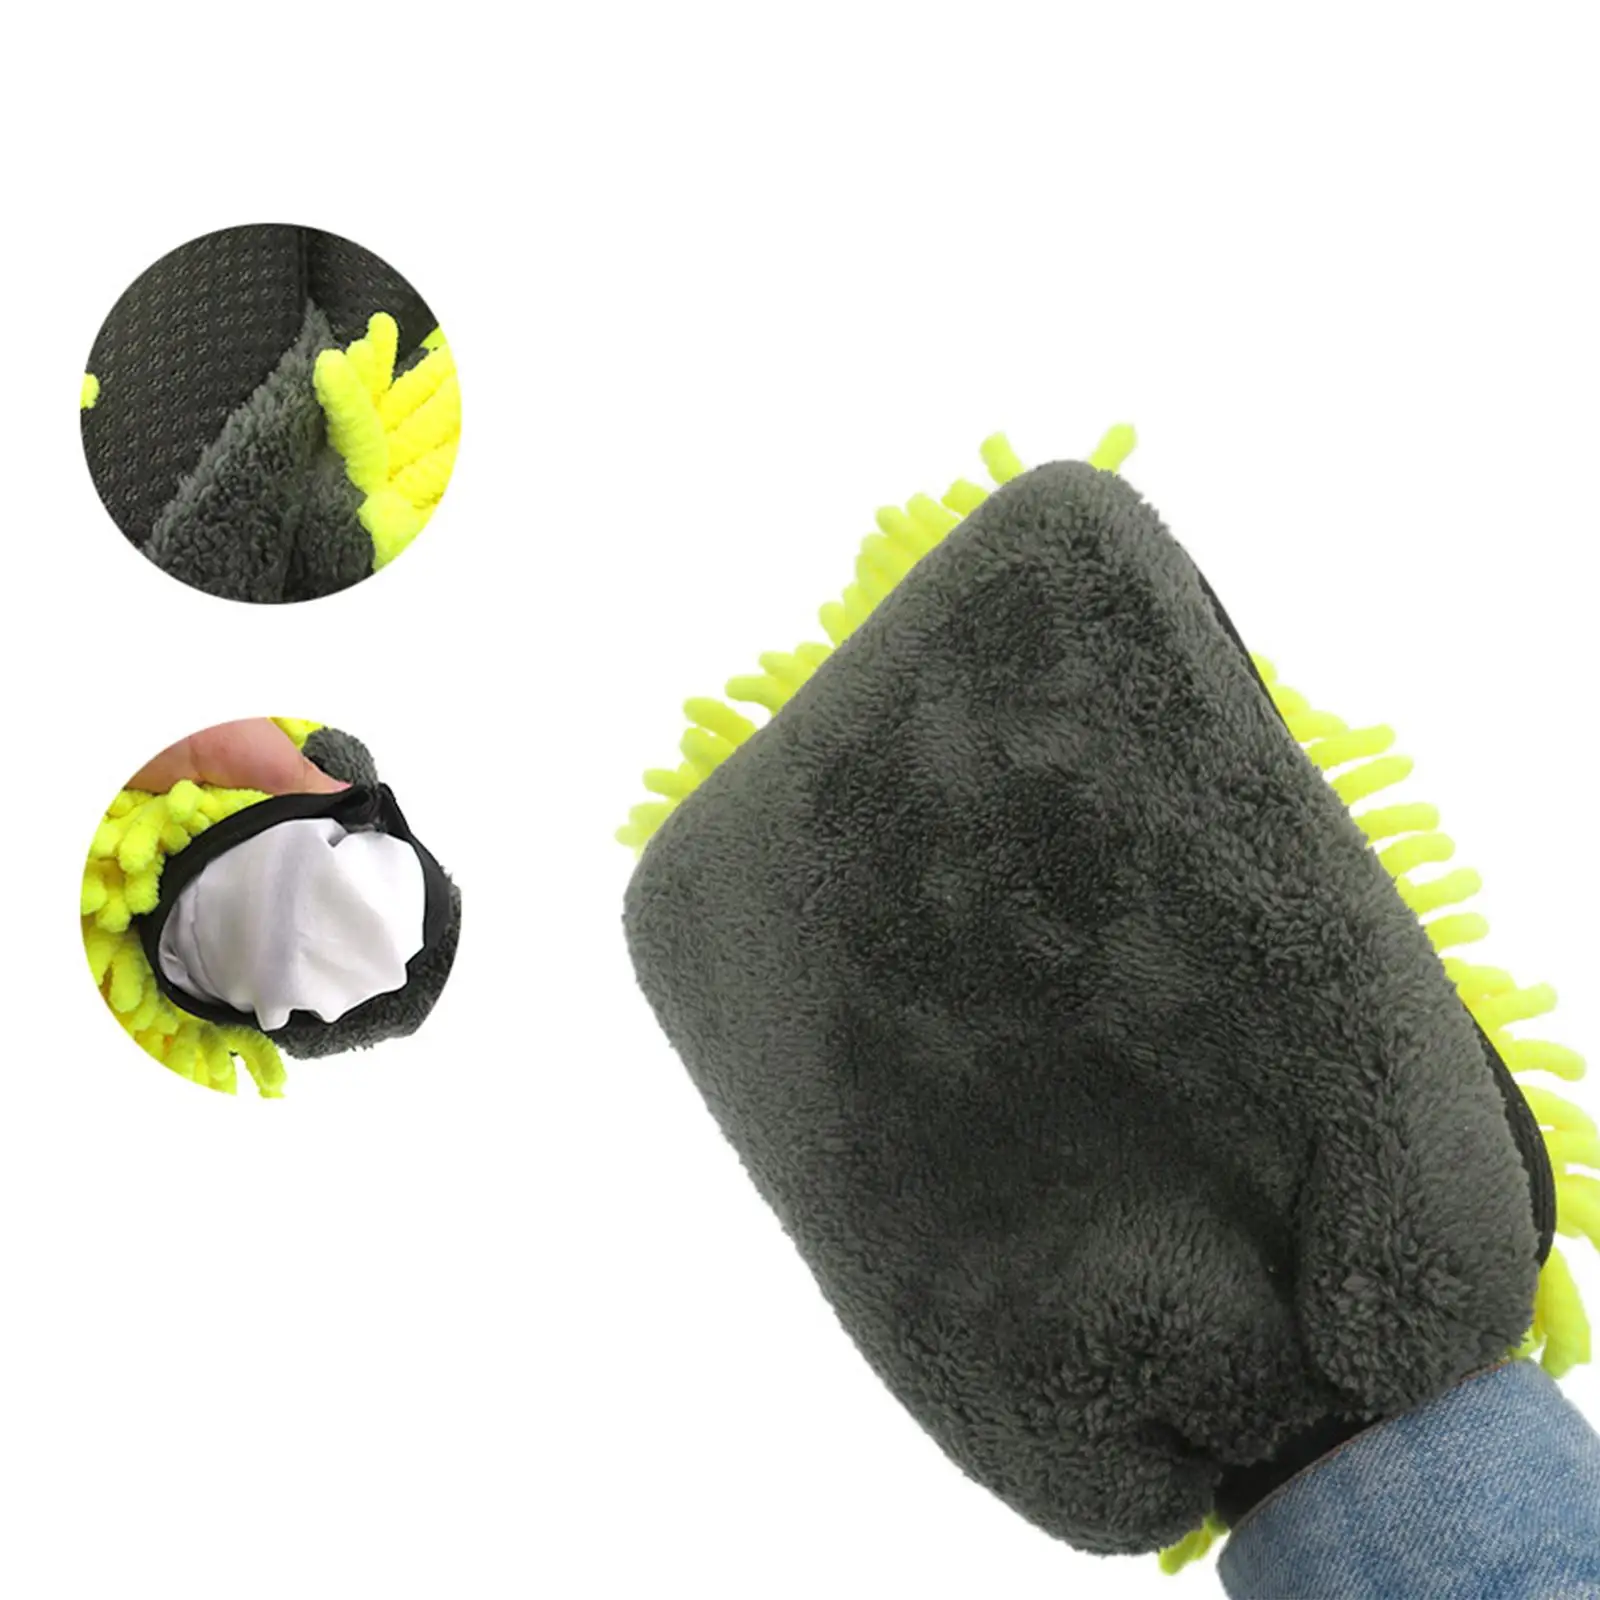 Car Wash Mitt Cleaning Tool Soft Scratch Free for Motorcycles Cars